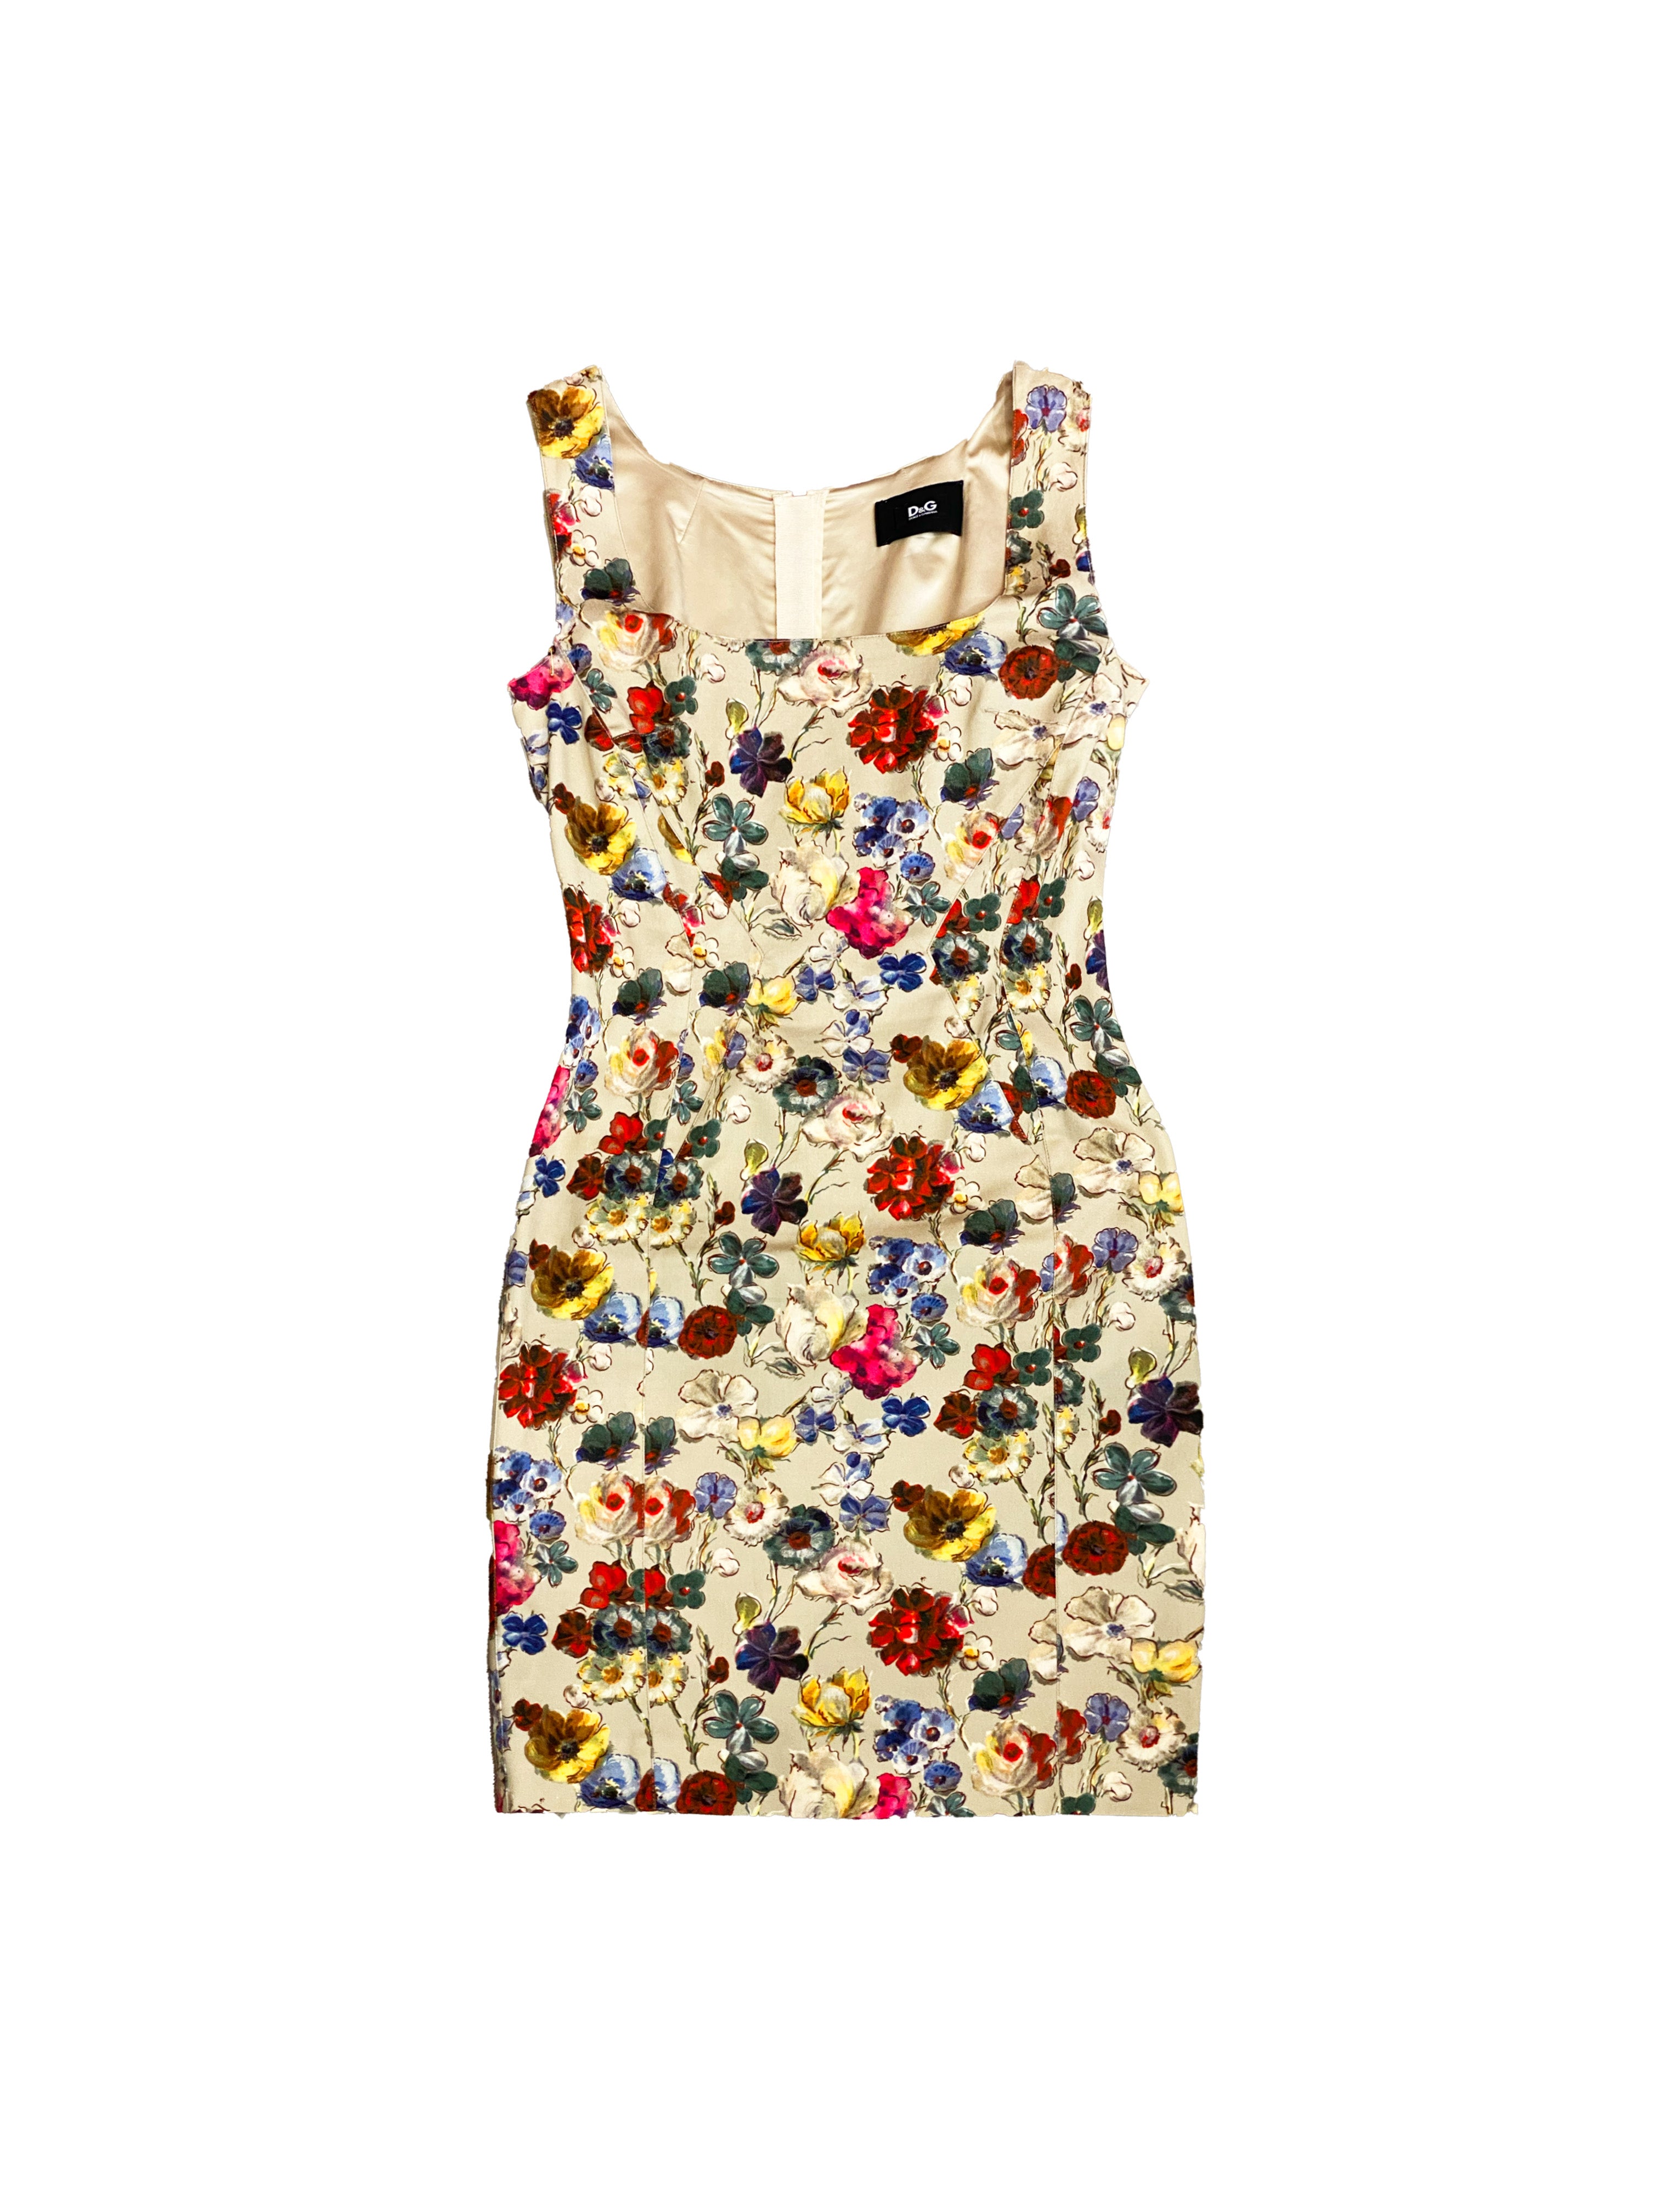 Dolce and Gabbana 1990s Cream Floral Dress